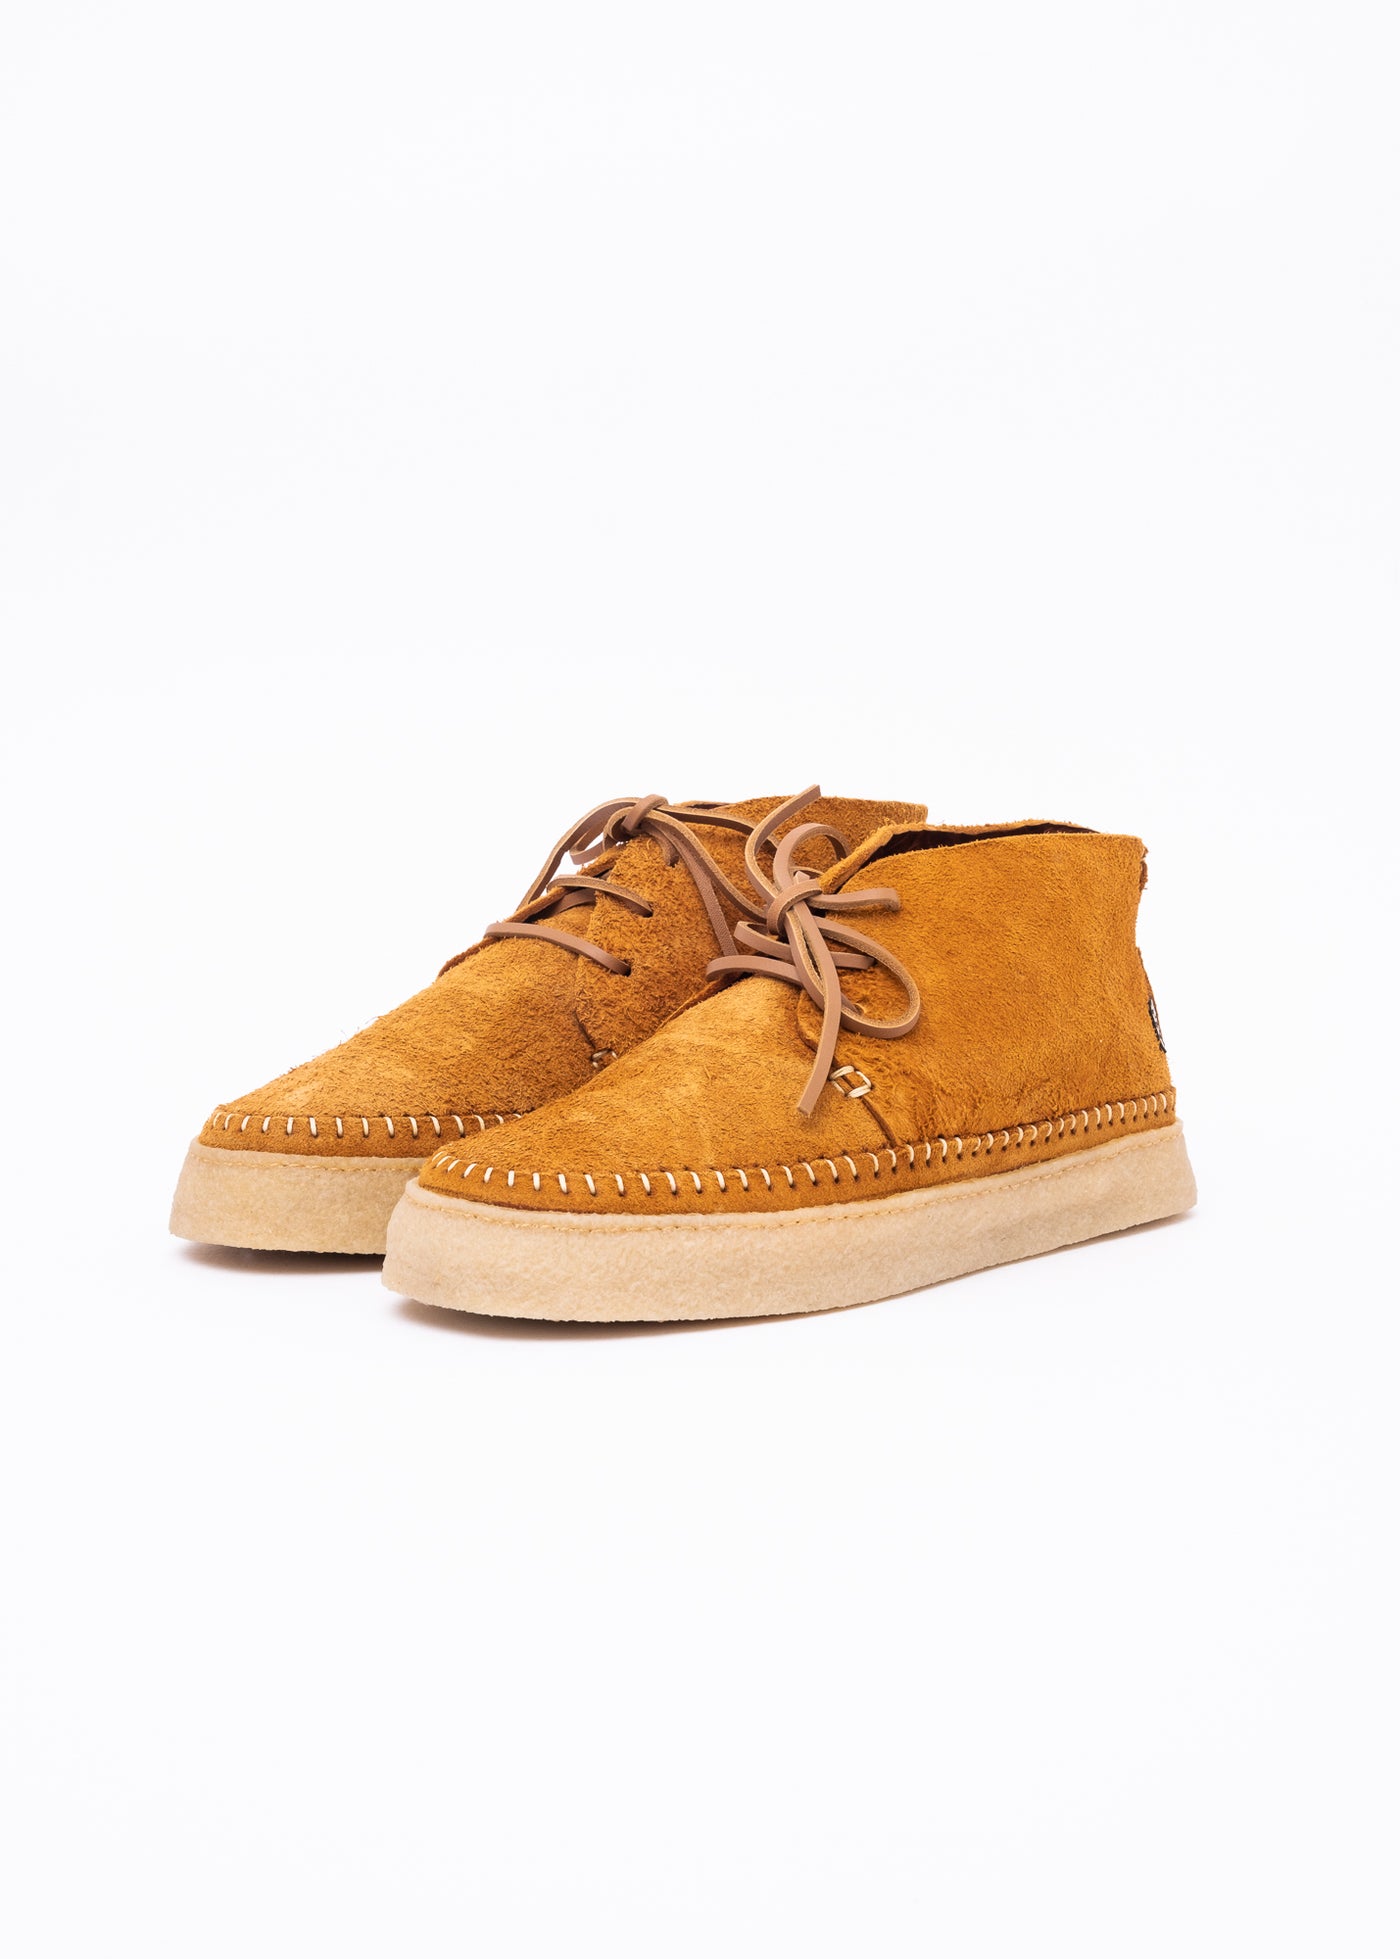 Yogi Hitch Reverse Tumbled Leather Chukka with Crepe Out Sole / Chestnut Brown